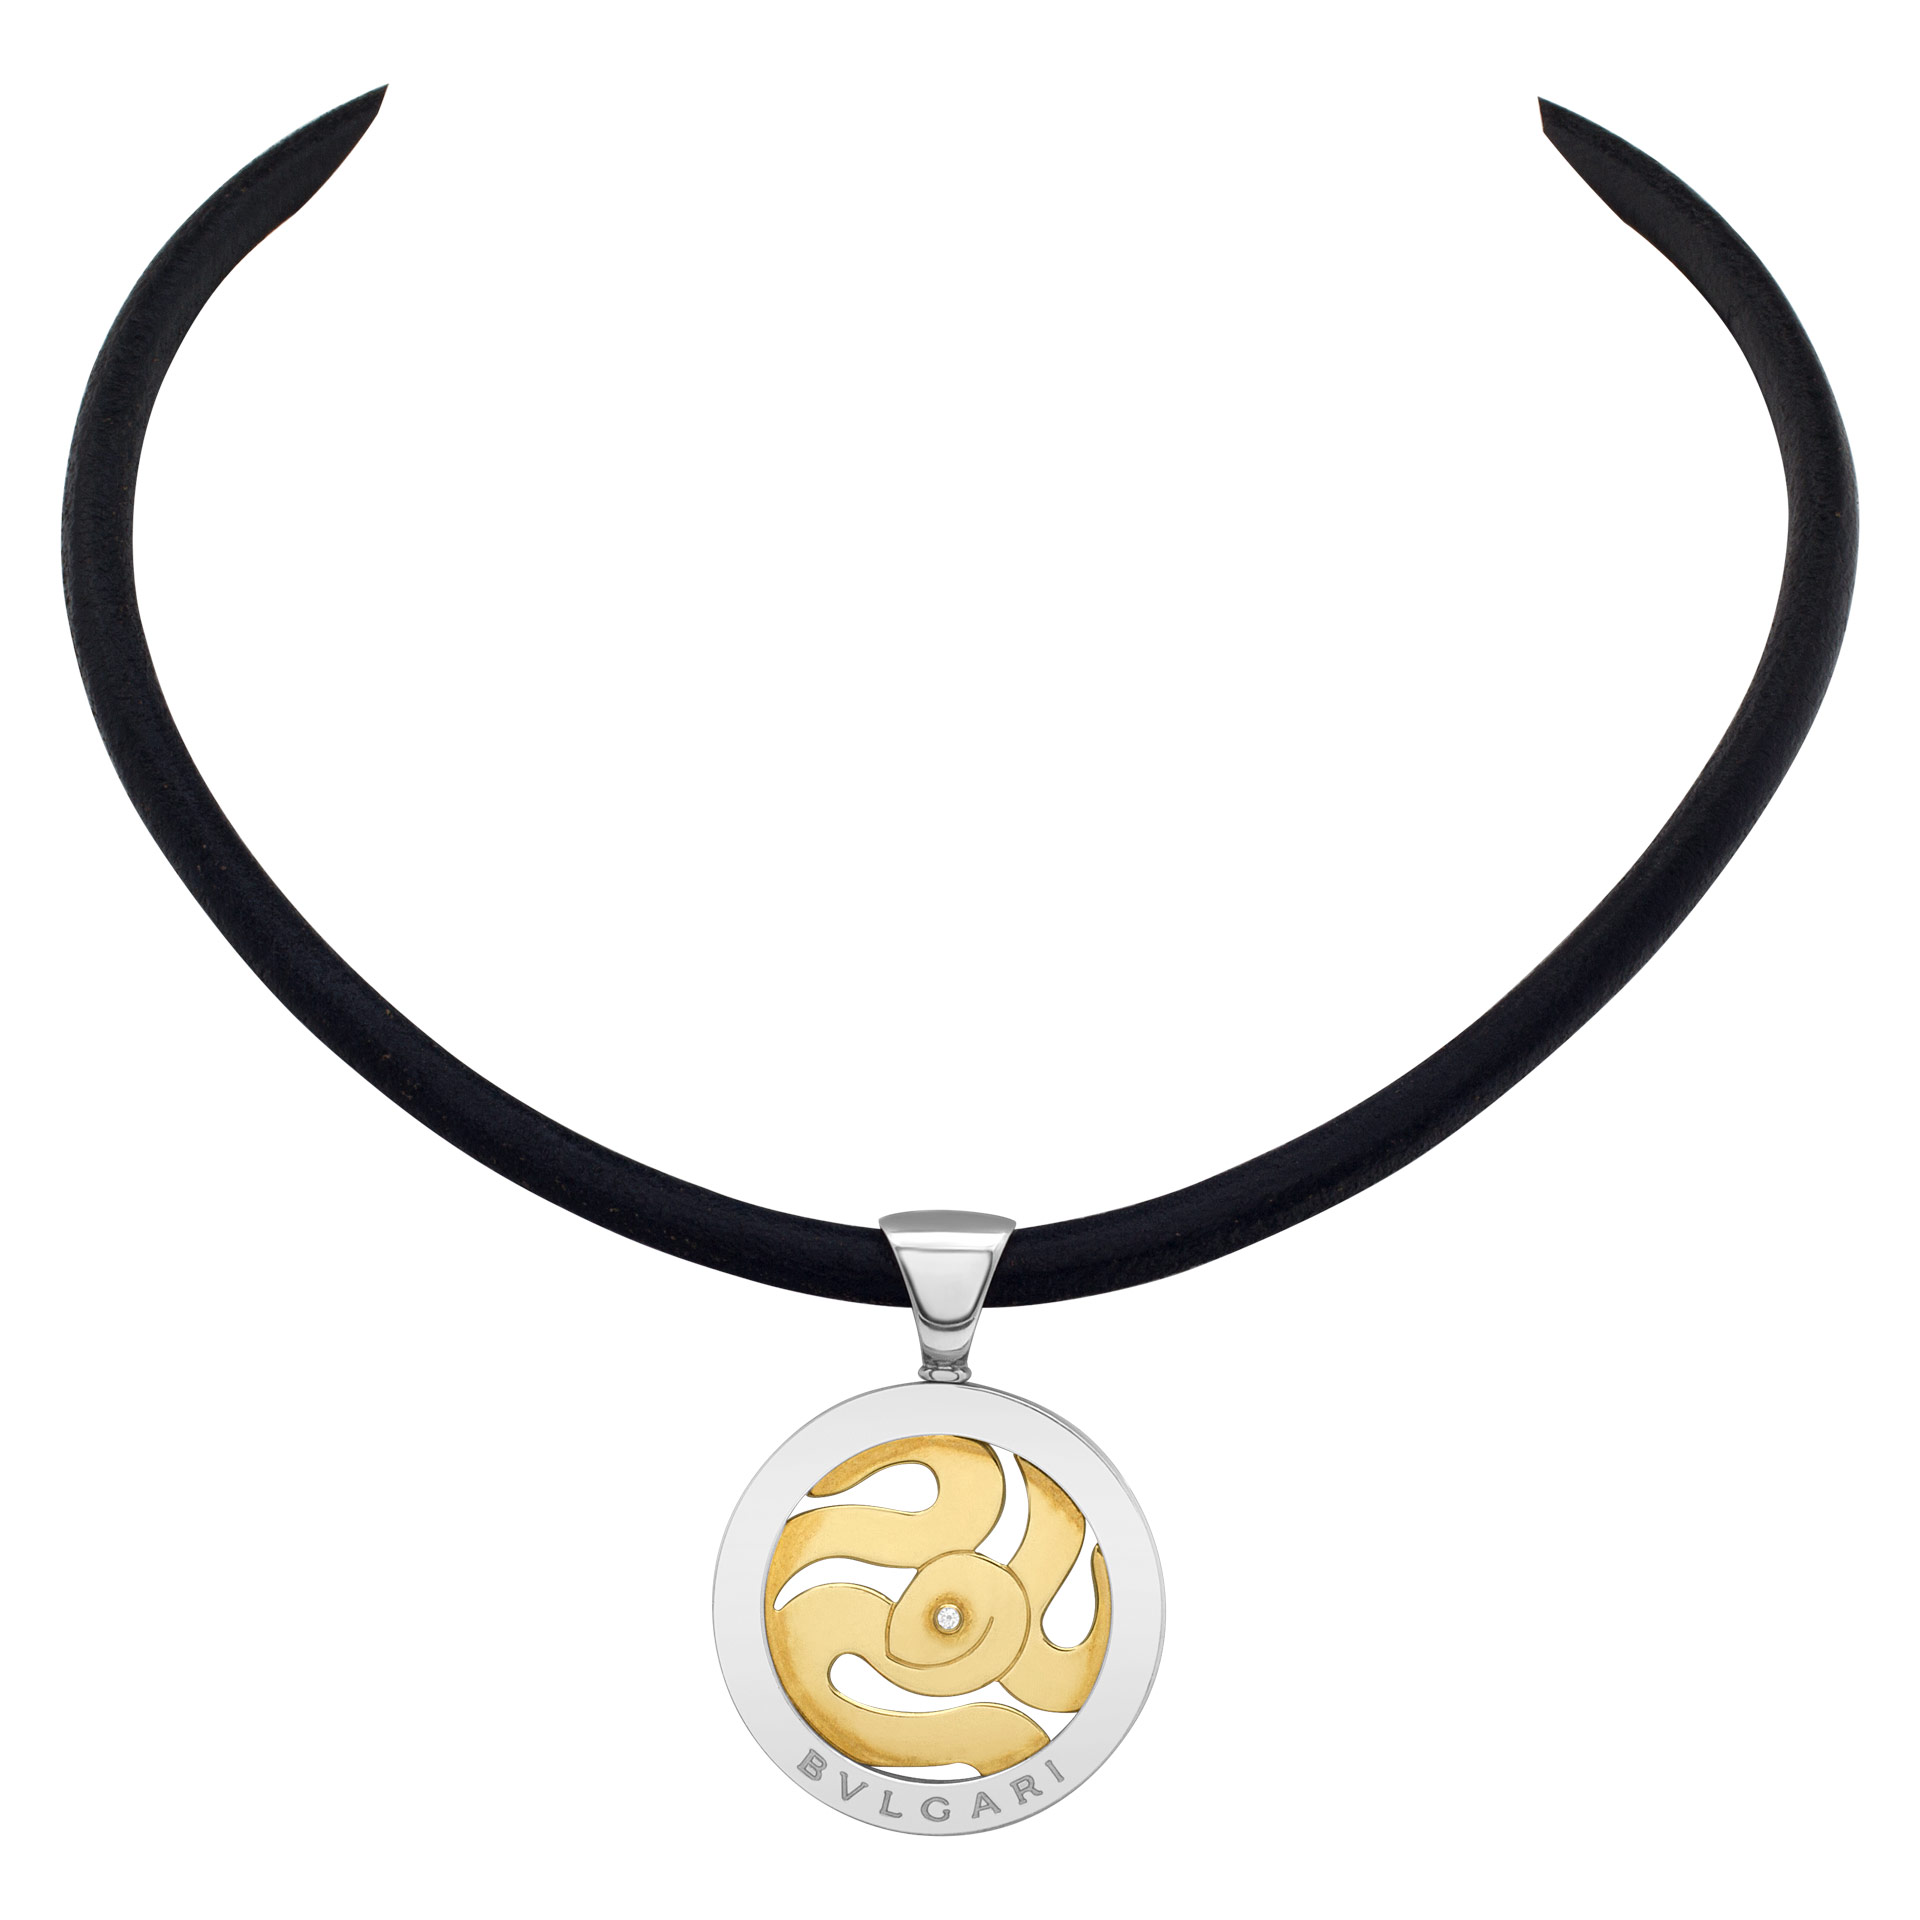 Bvlgari Serpenti logo tondo necklace in 18k gold and stainless steel